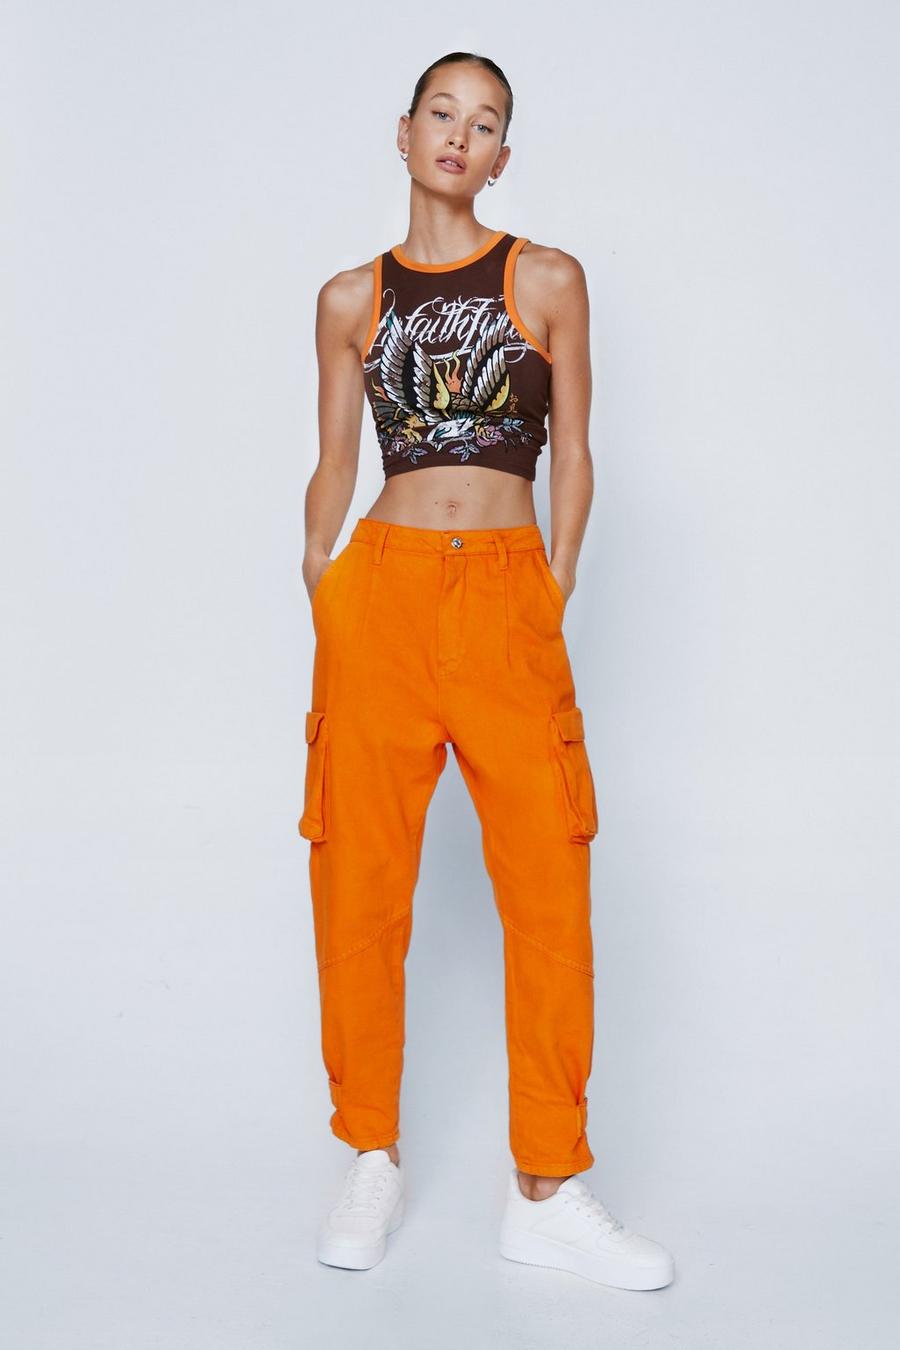 Cropped Cuffed Cargo Pants